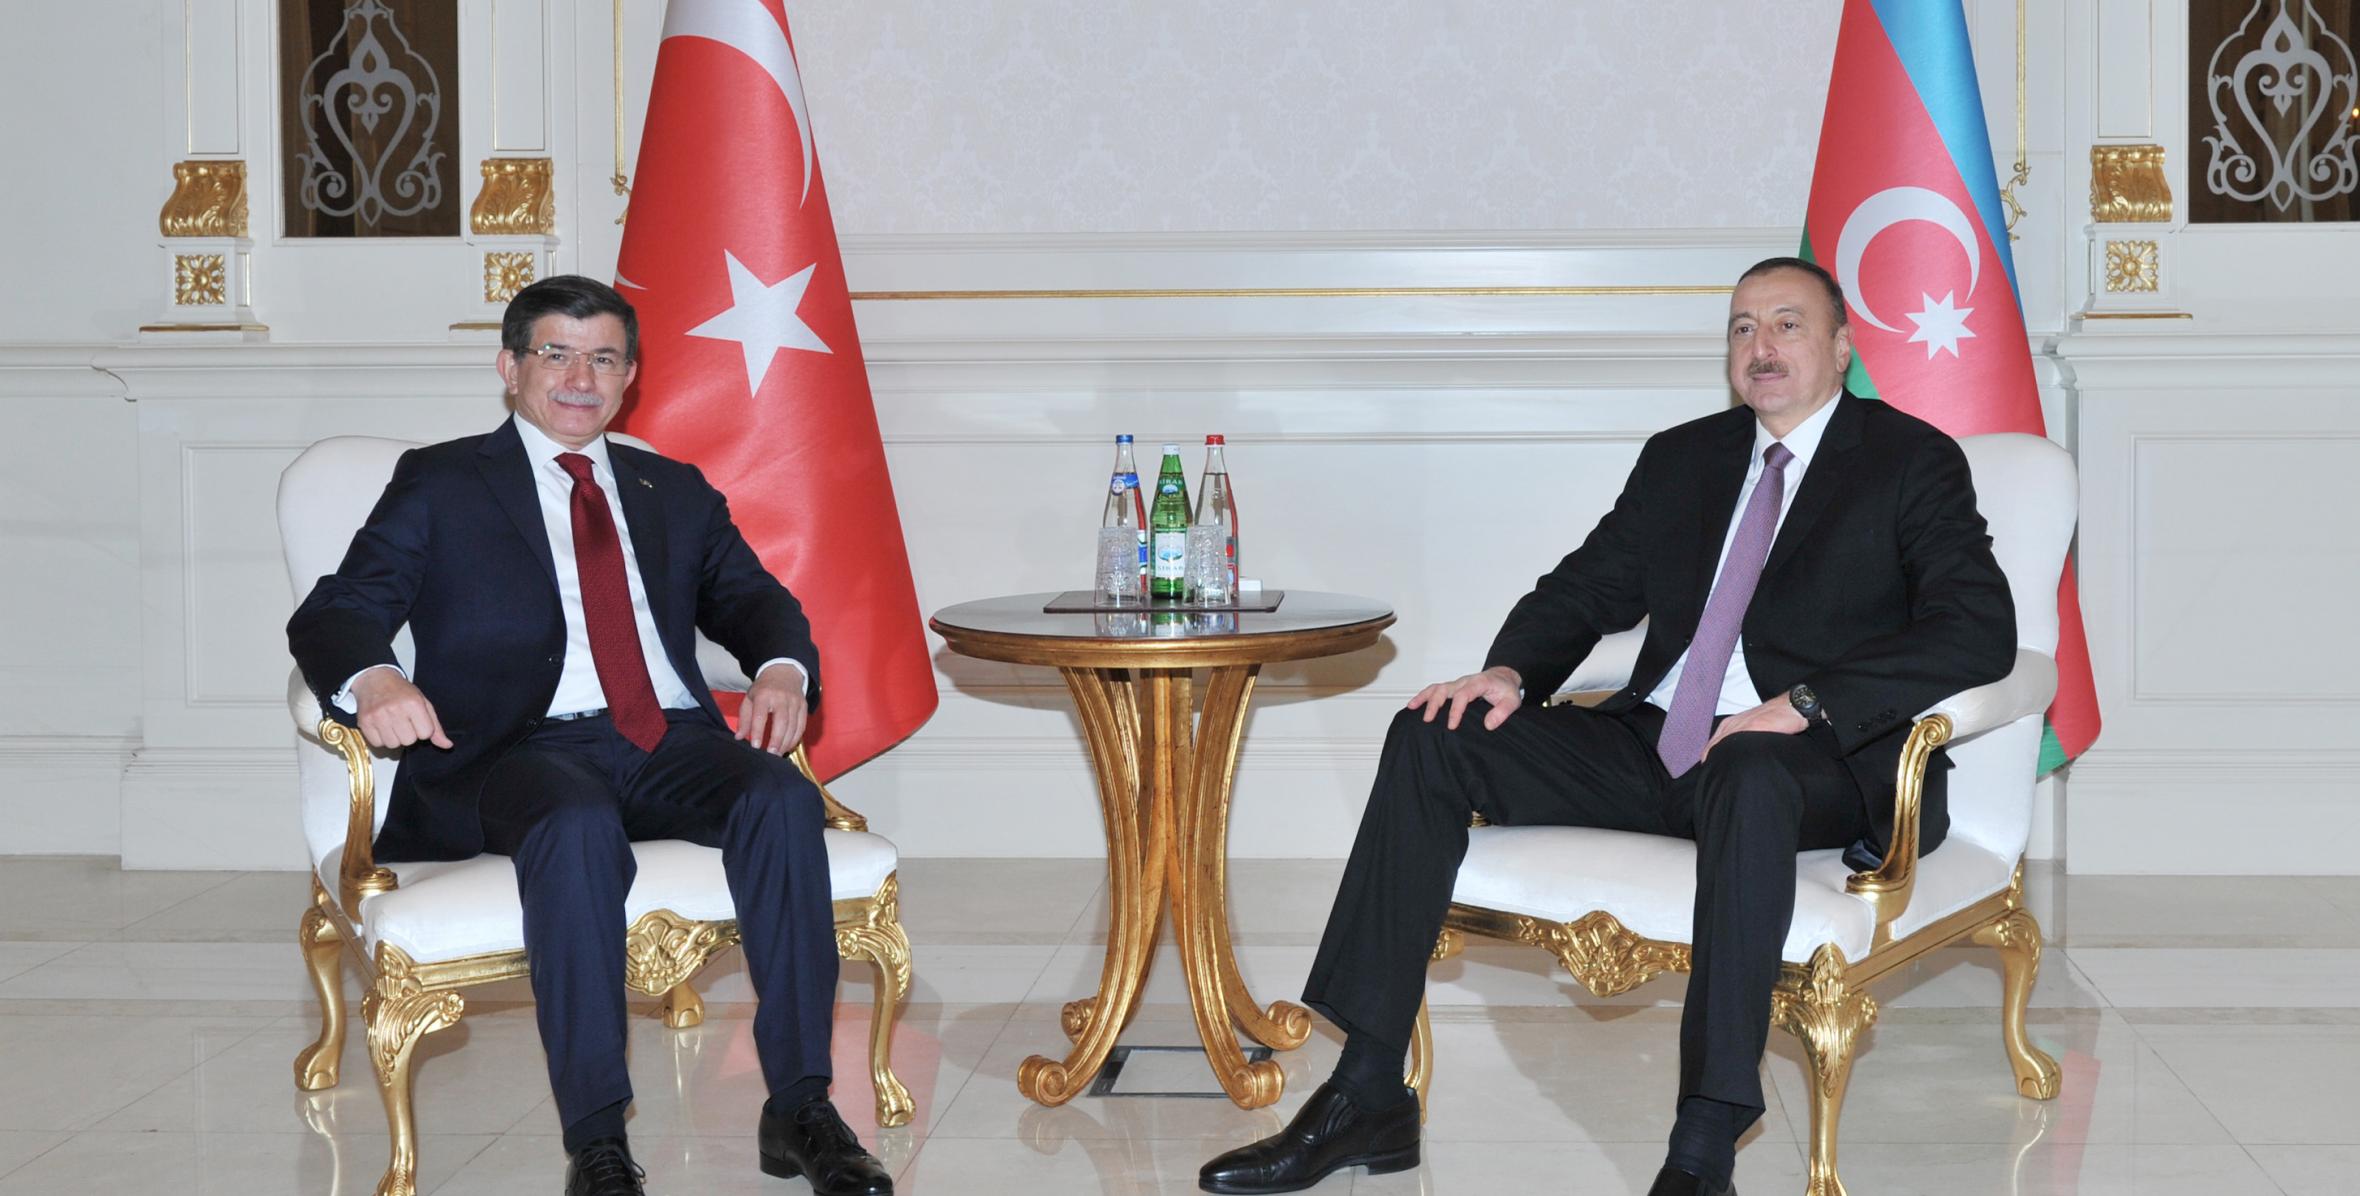 Ilham Aliyev and Prime Minister of Turkey Ahmet Davutoglu held a one-on-one meeting